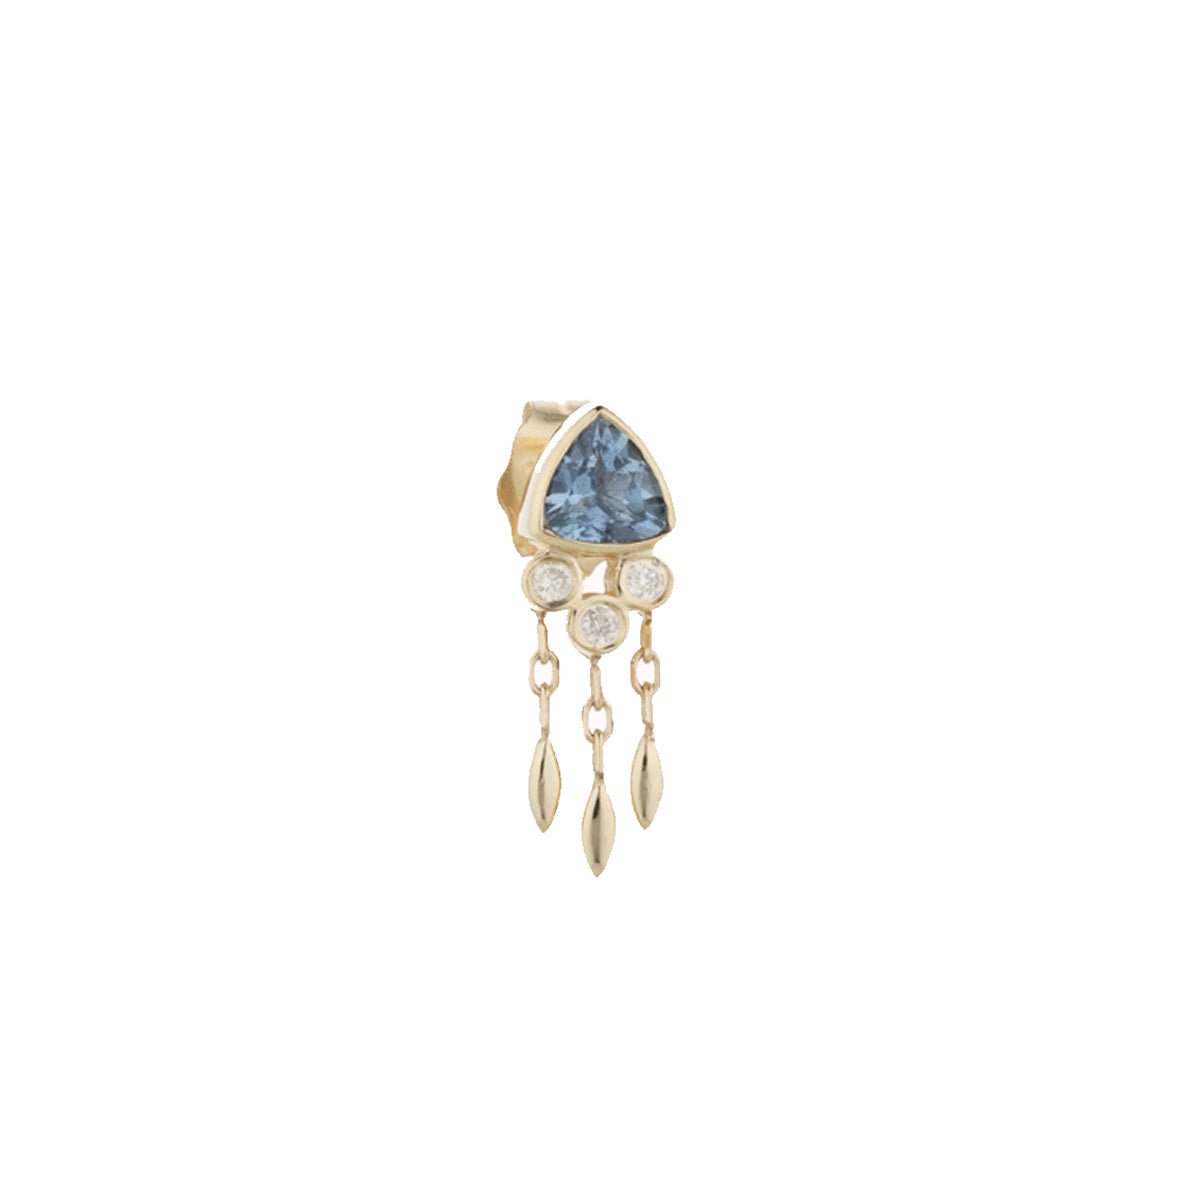 14K Gold Trillion Aquamarine Stud Earring with Three Diamonds and Dangling Details - Peridot Fine Jewelry - Celine Daoust